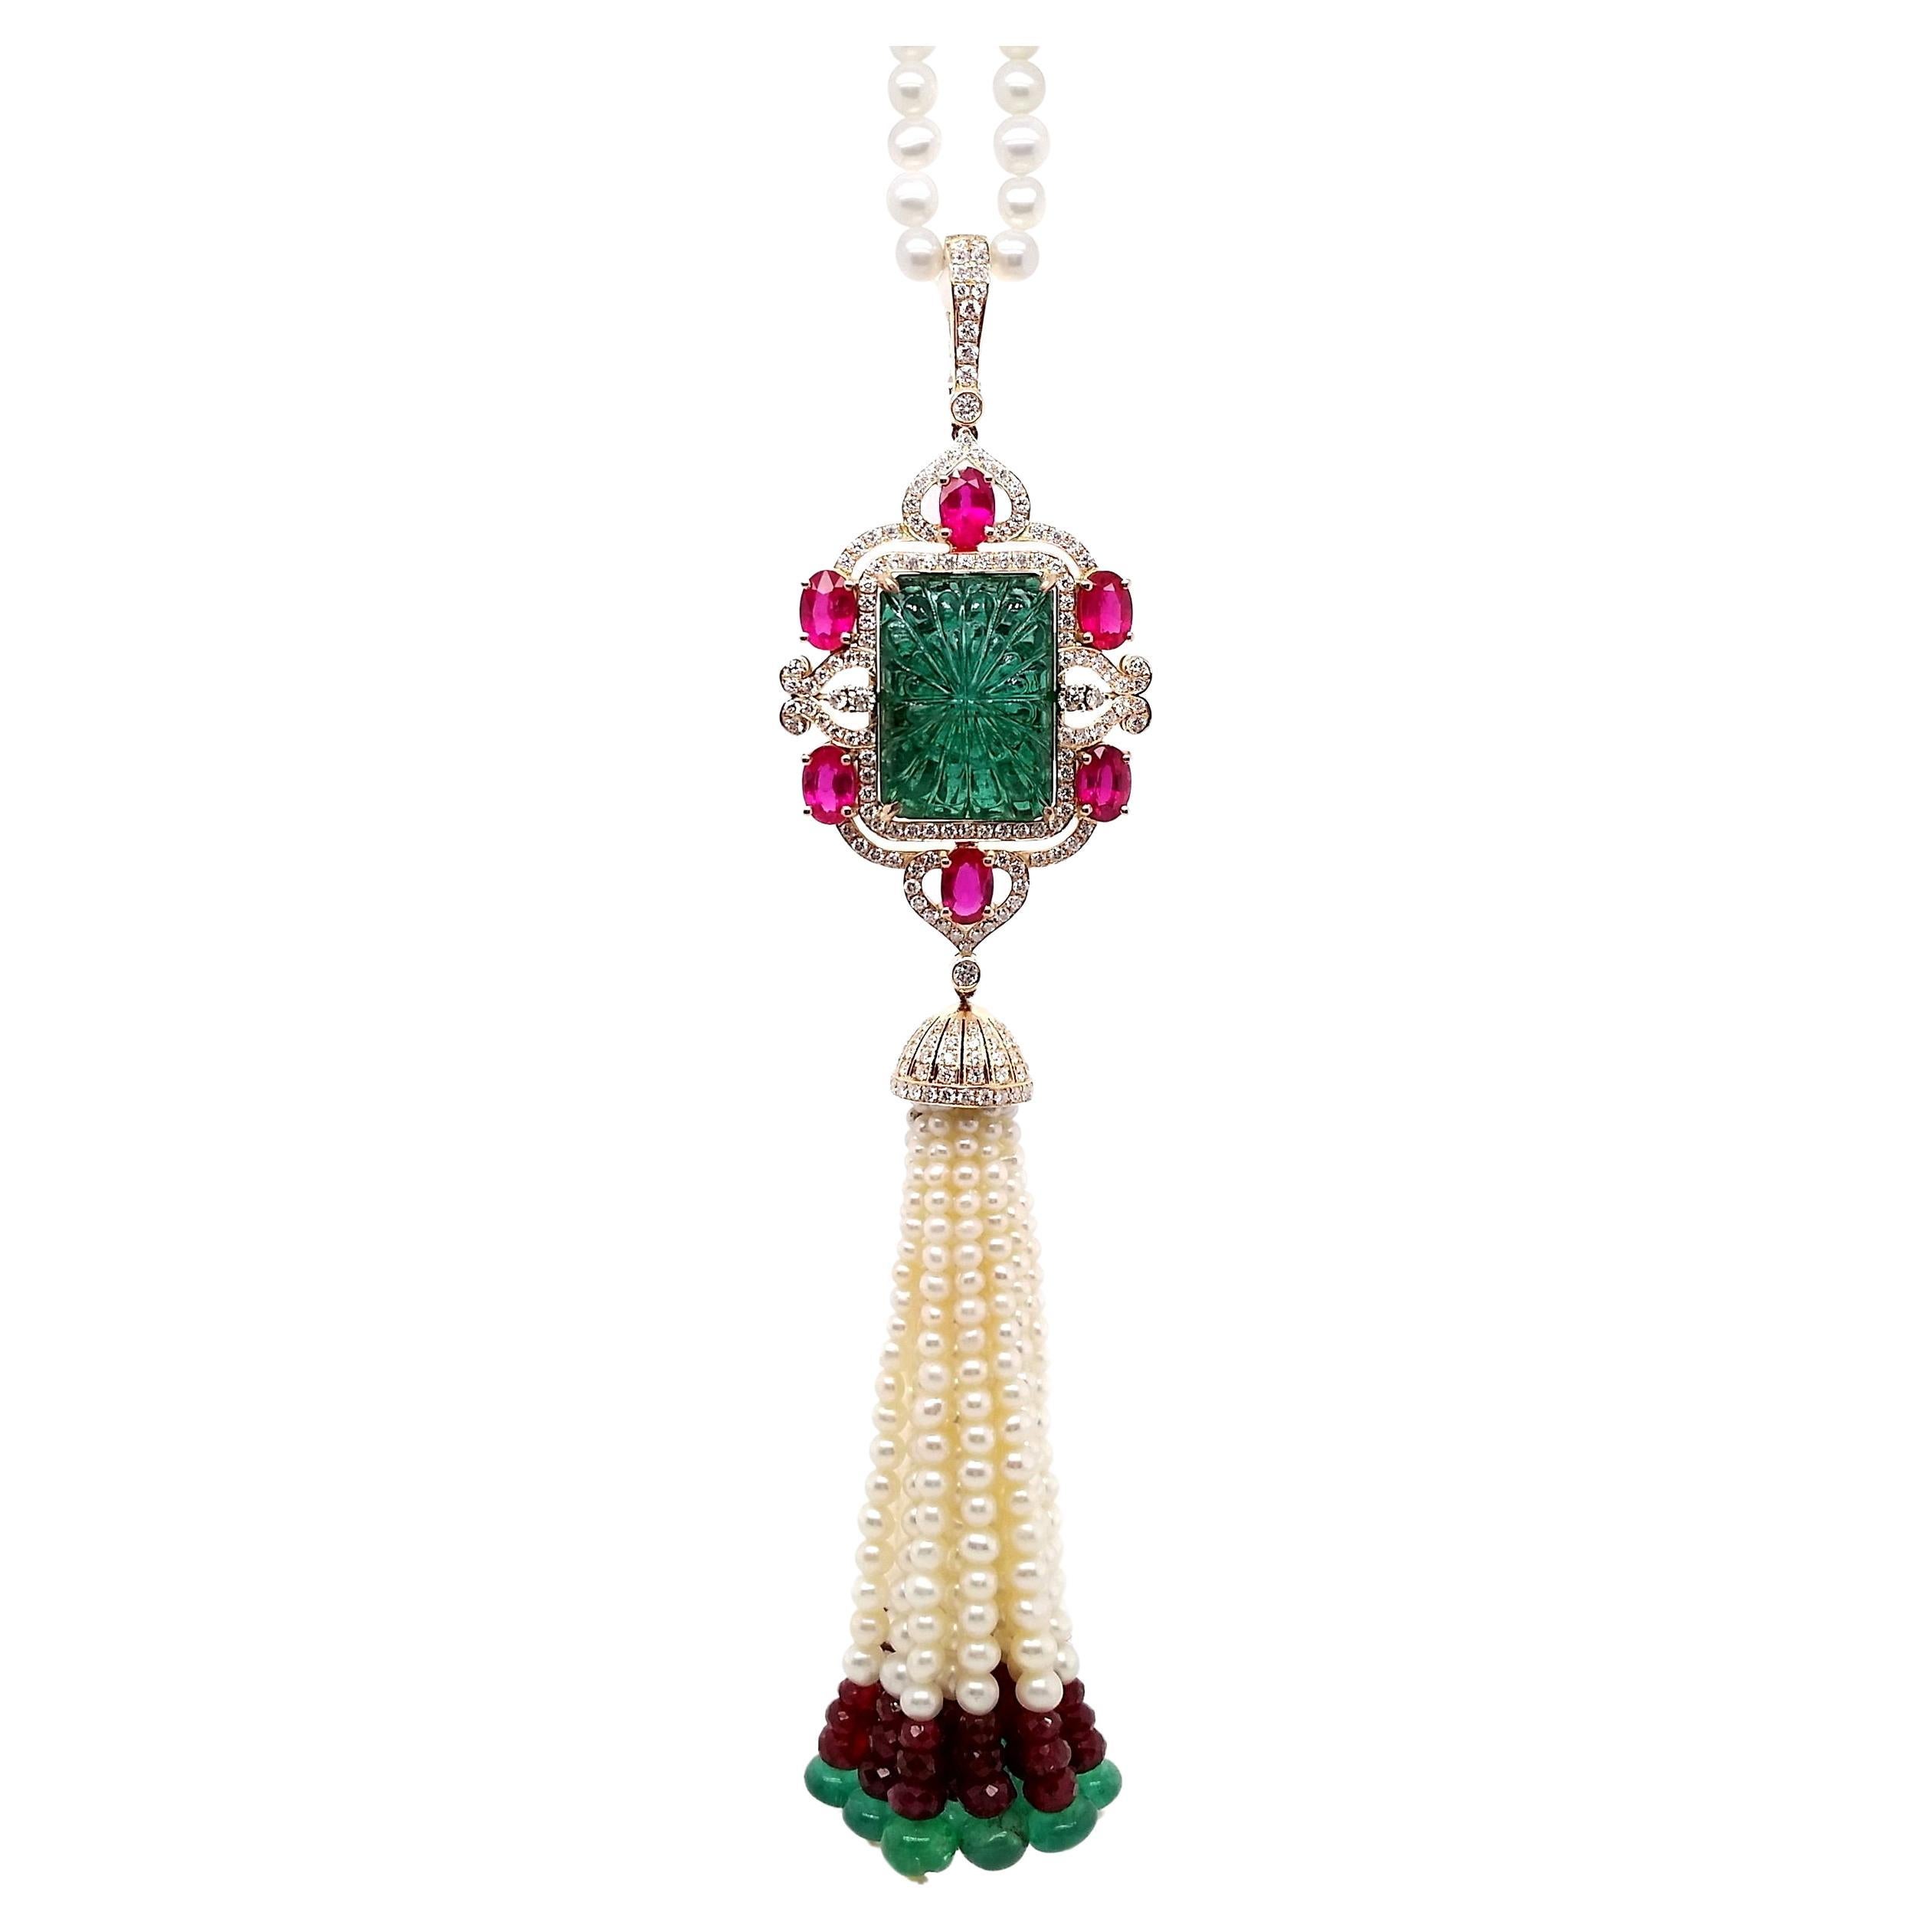 IGI Certified 30.86ct Emerald 23.65 Rubies 1.52ct Diamonds and Pearls Necklace For Sale